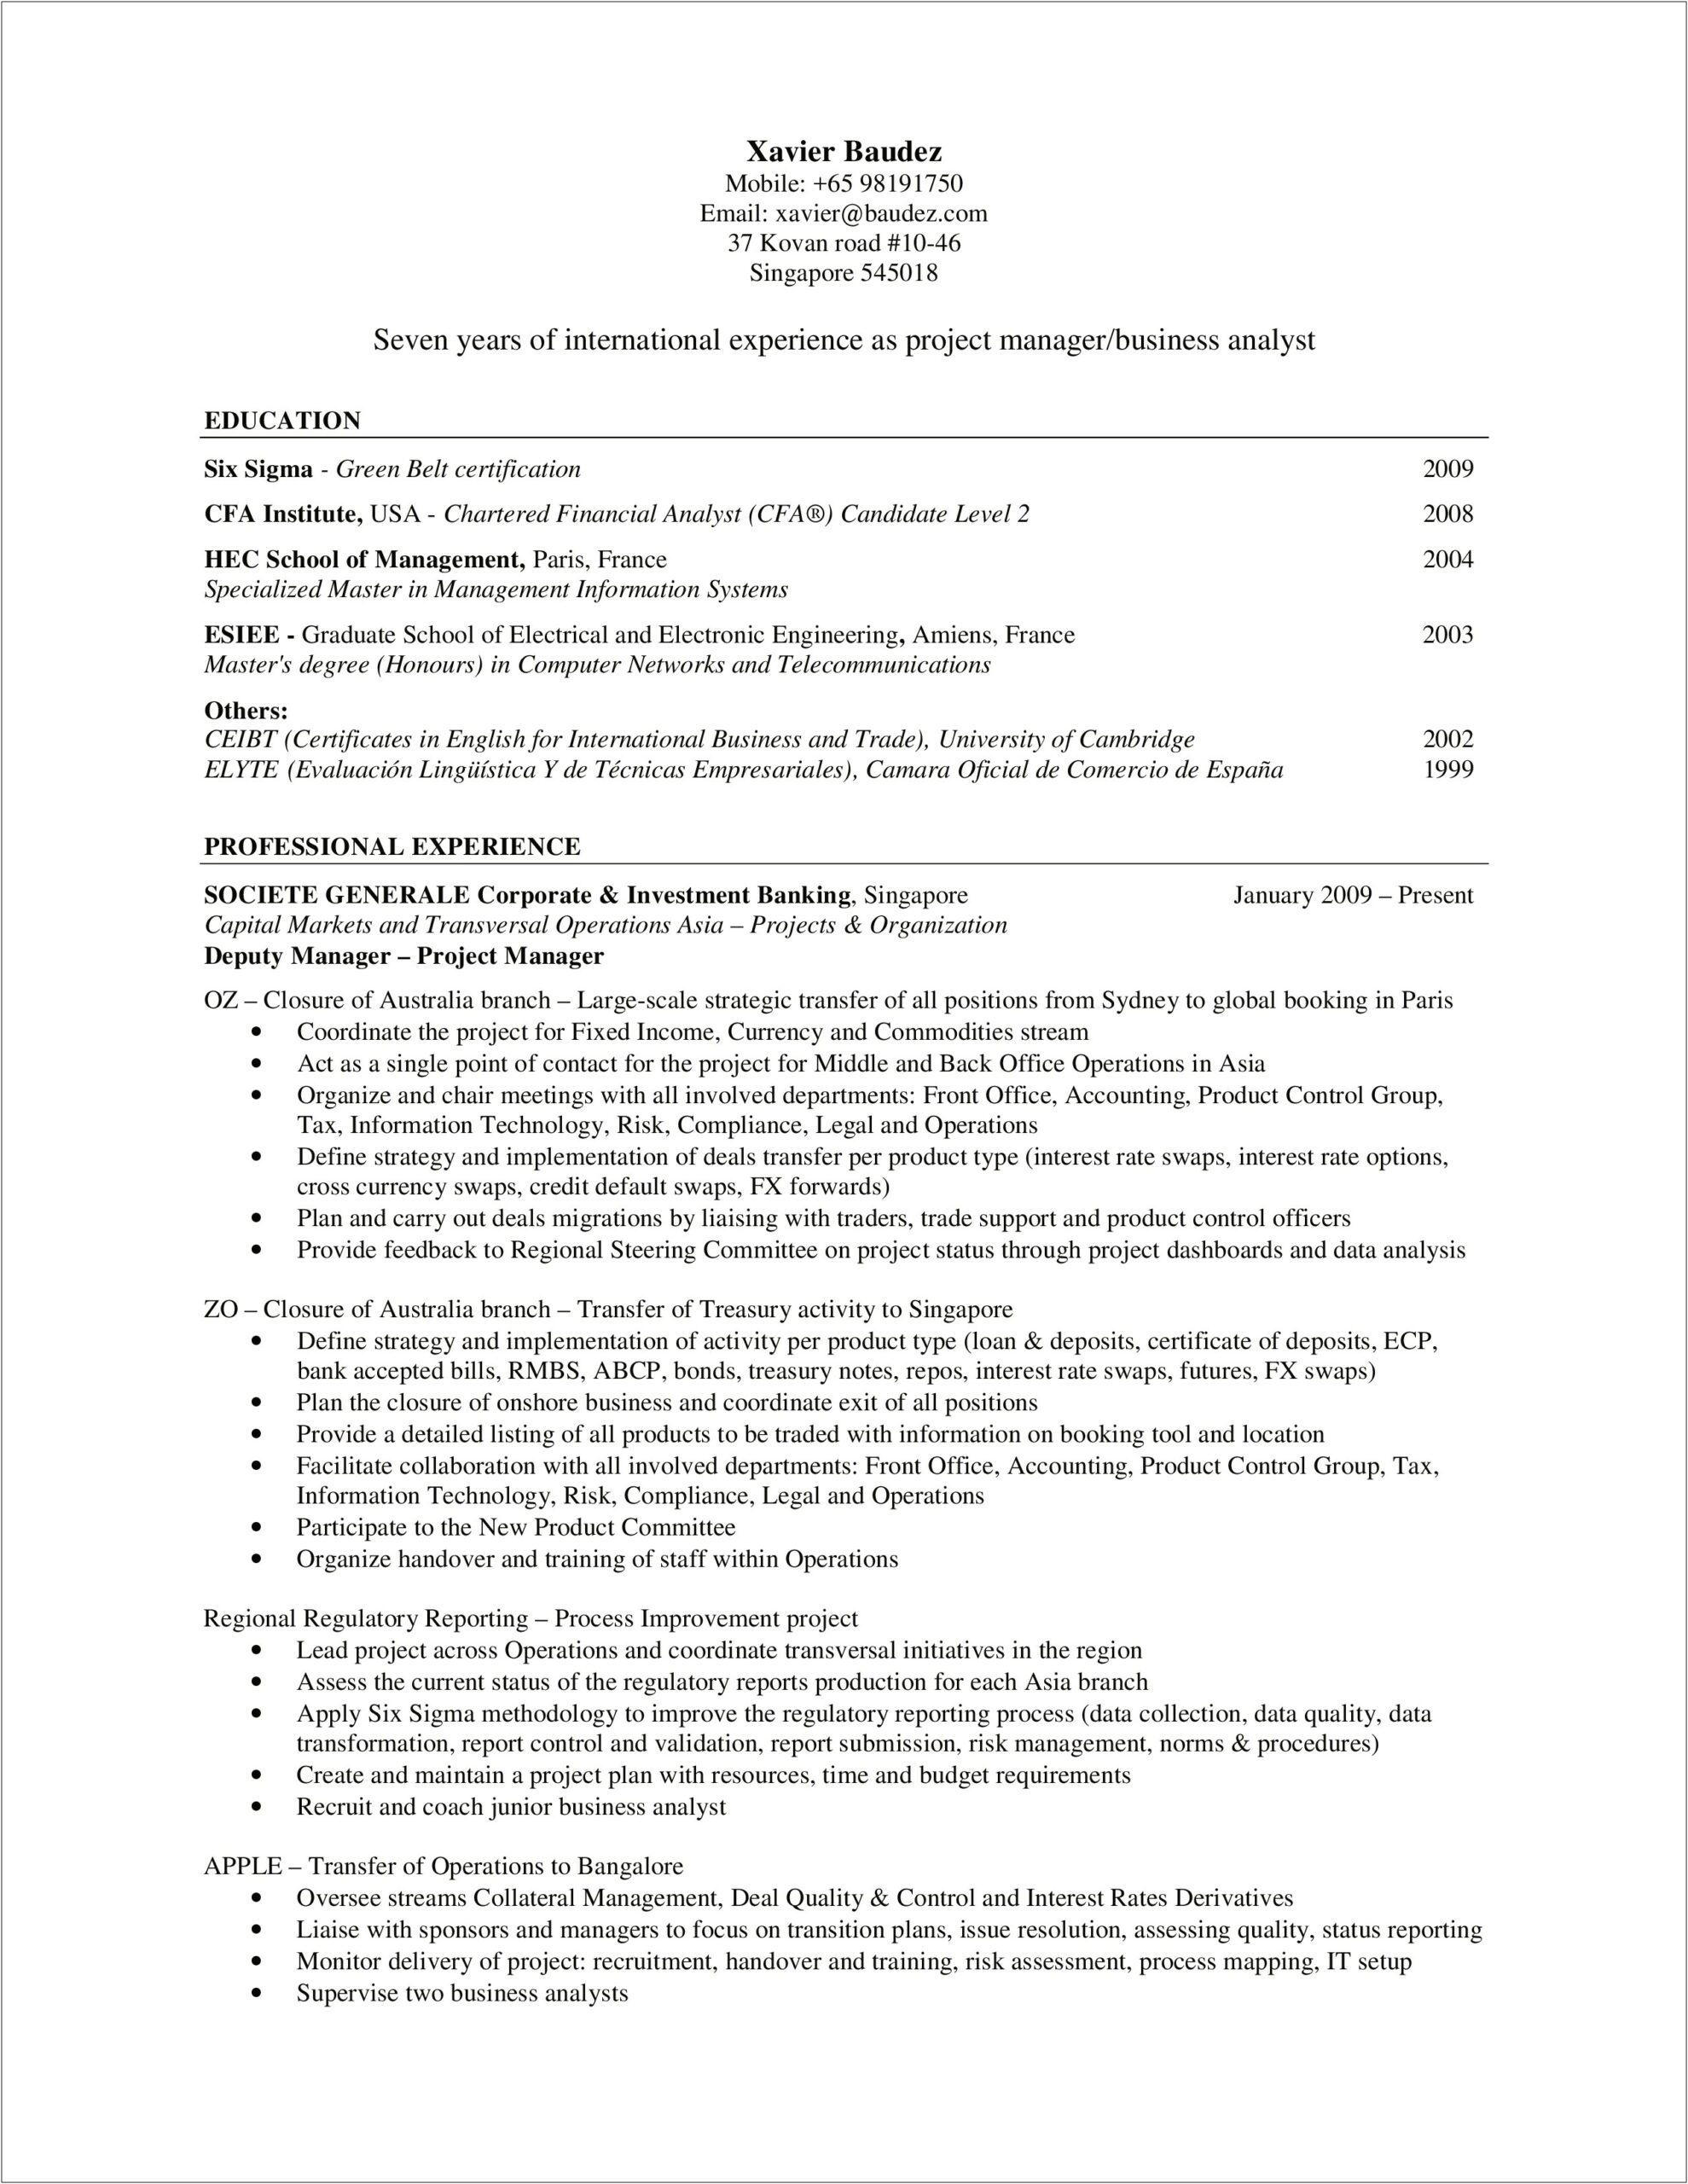 Resume Example Of Business Analyst For Recent Graduate